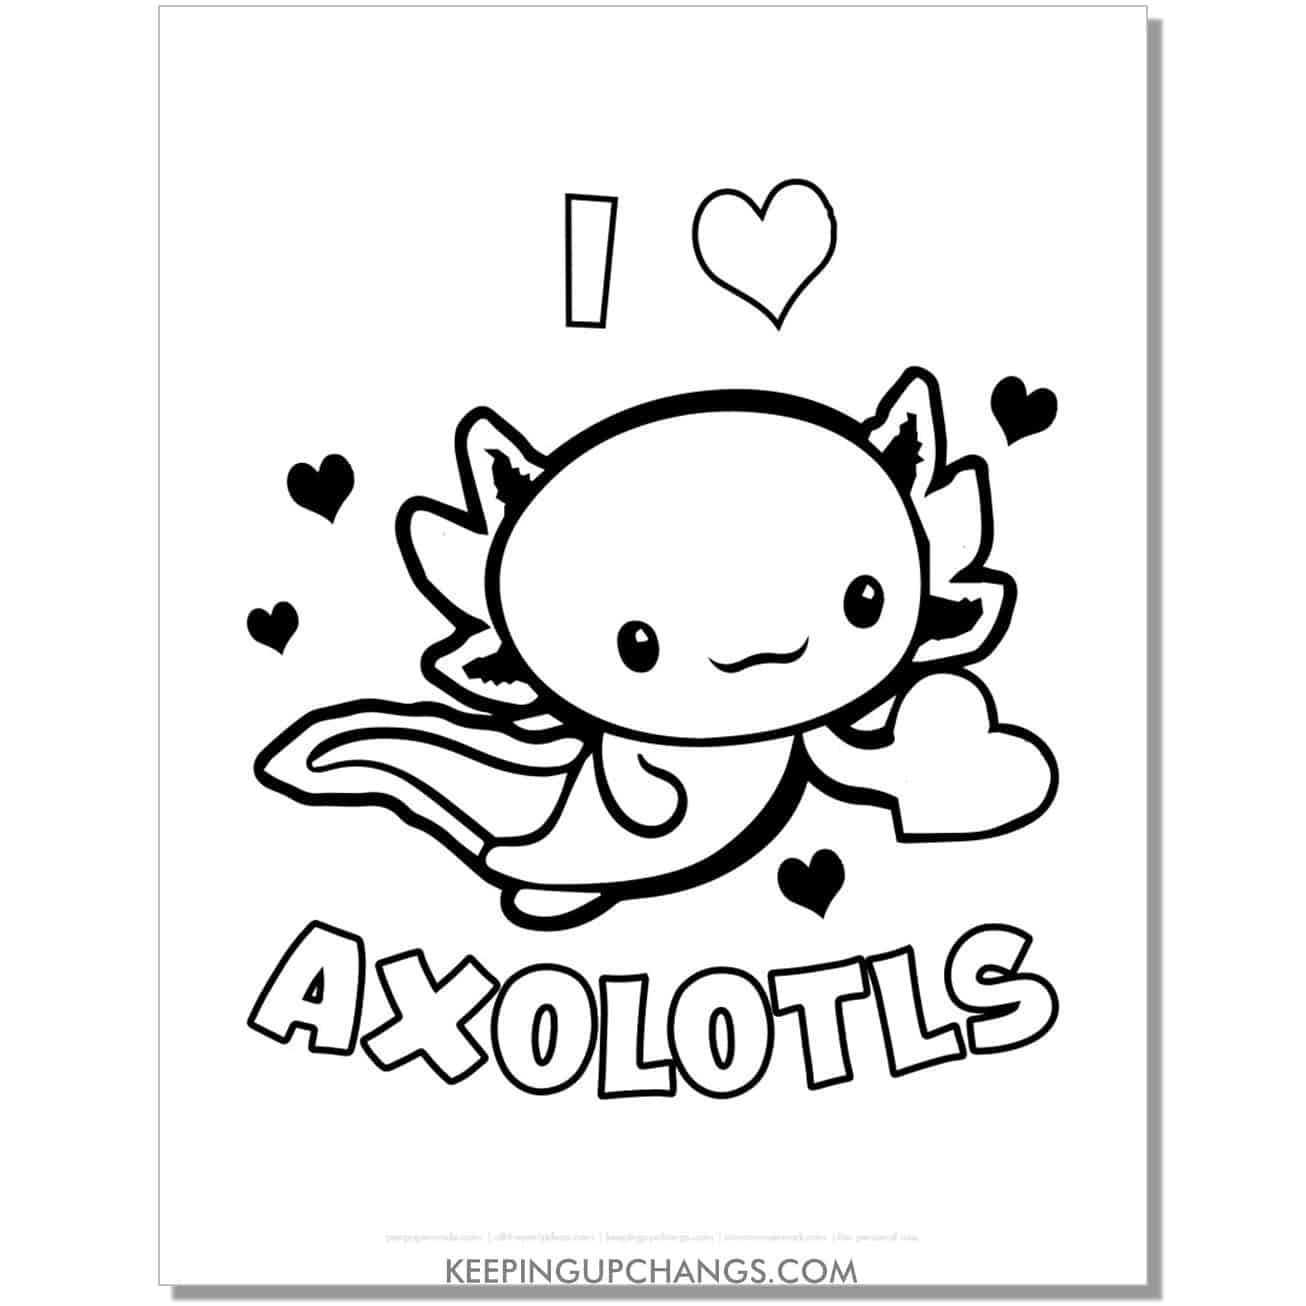 free i love axolotl coloring page with amphibian holding heart.